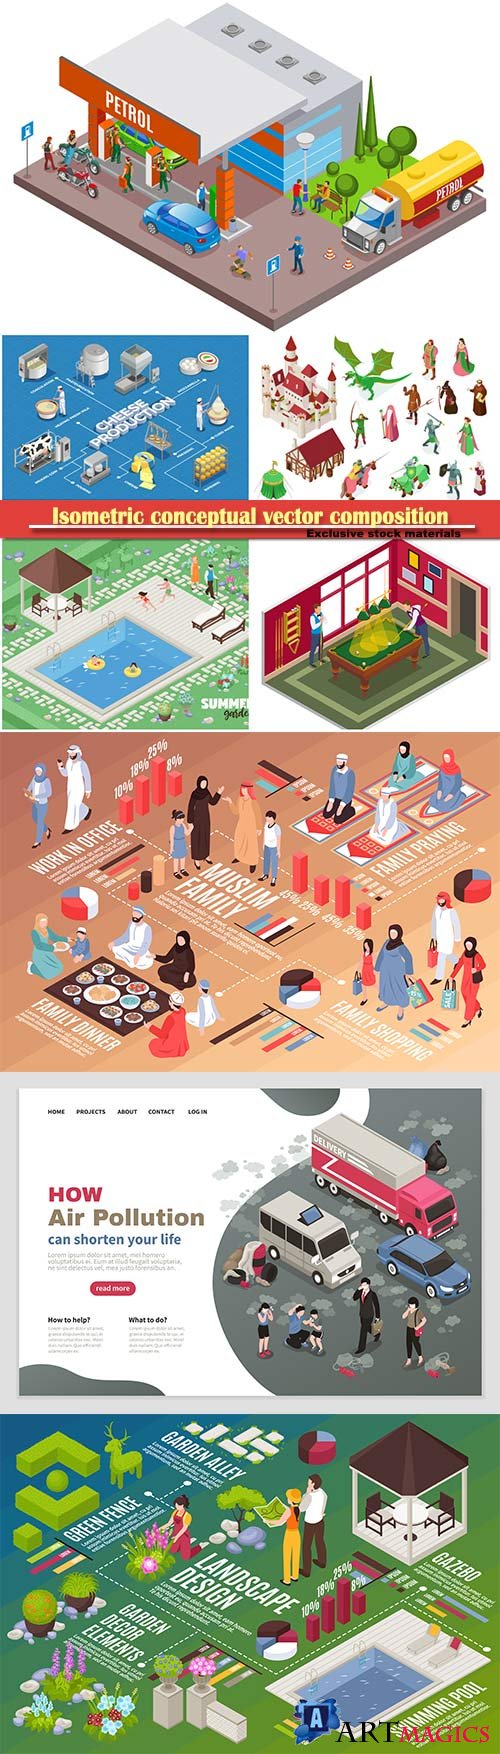 Isometric conceptual vector composition, infographics template # 66